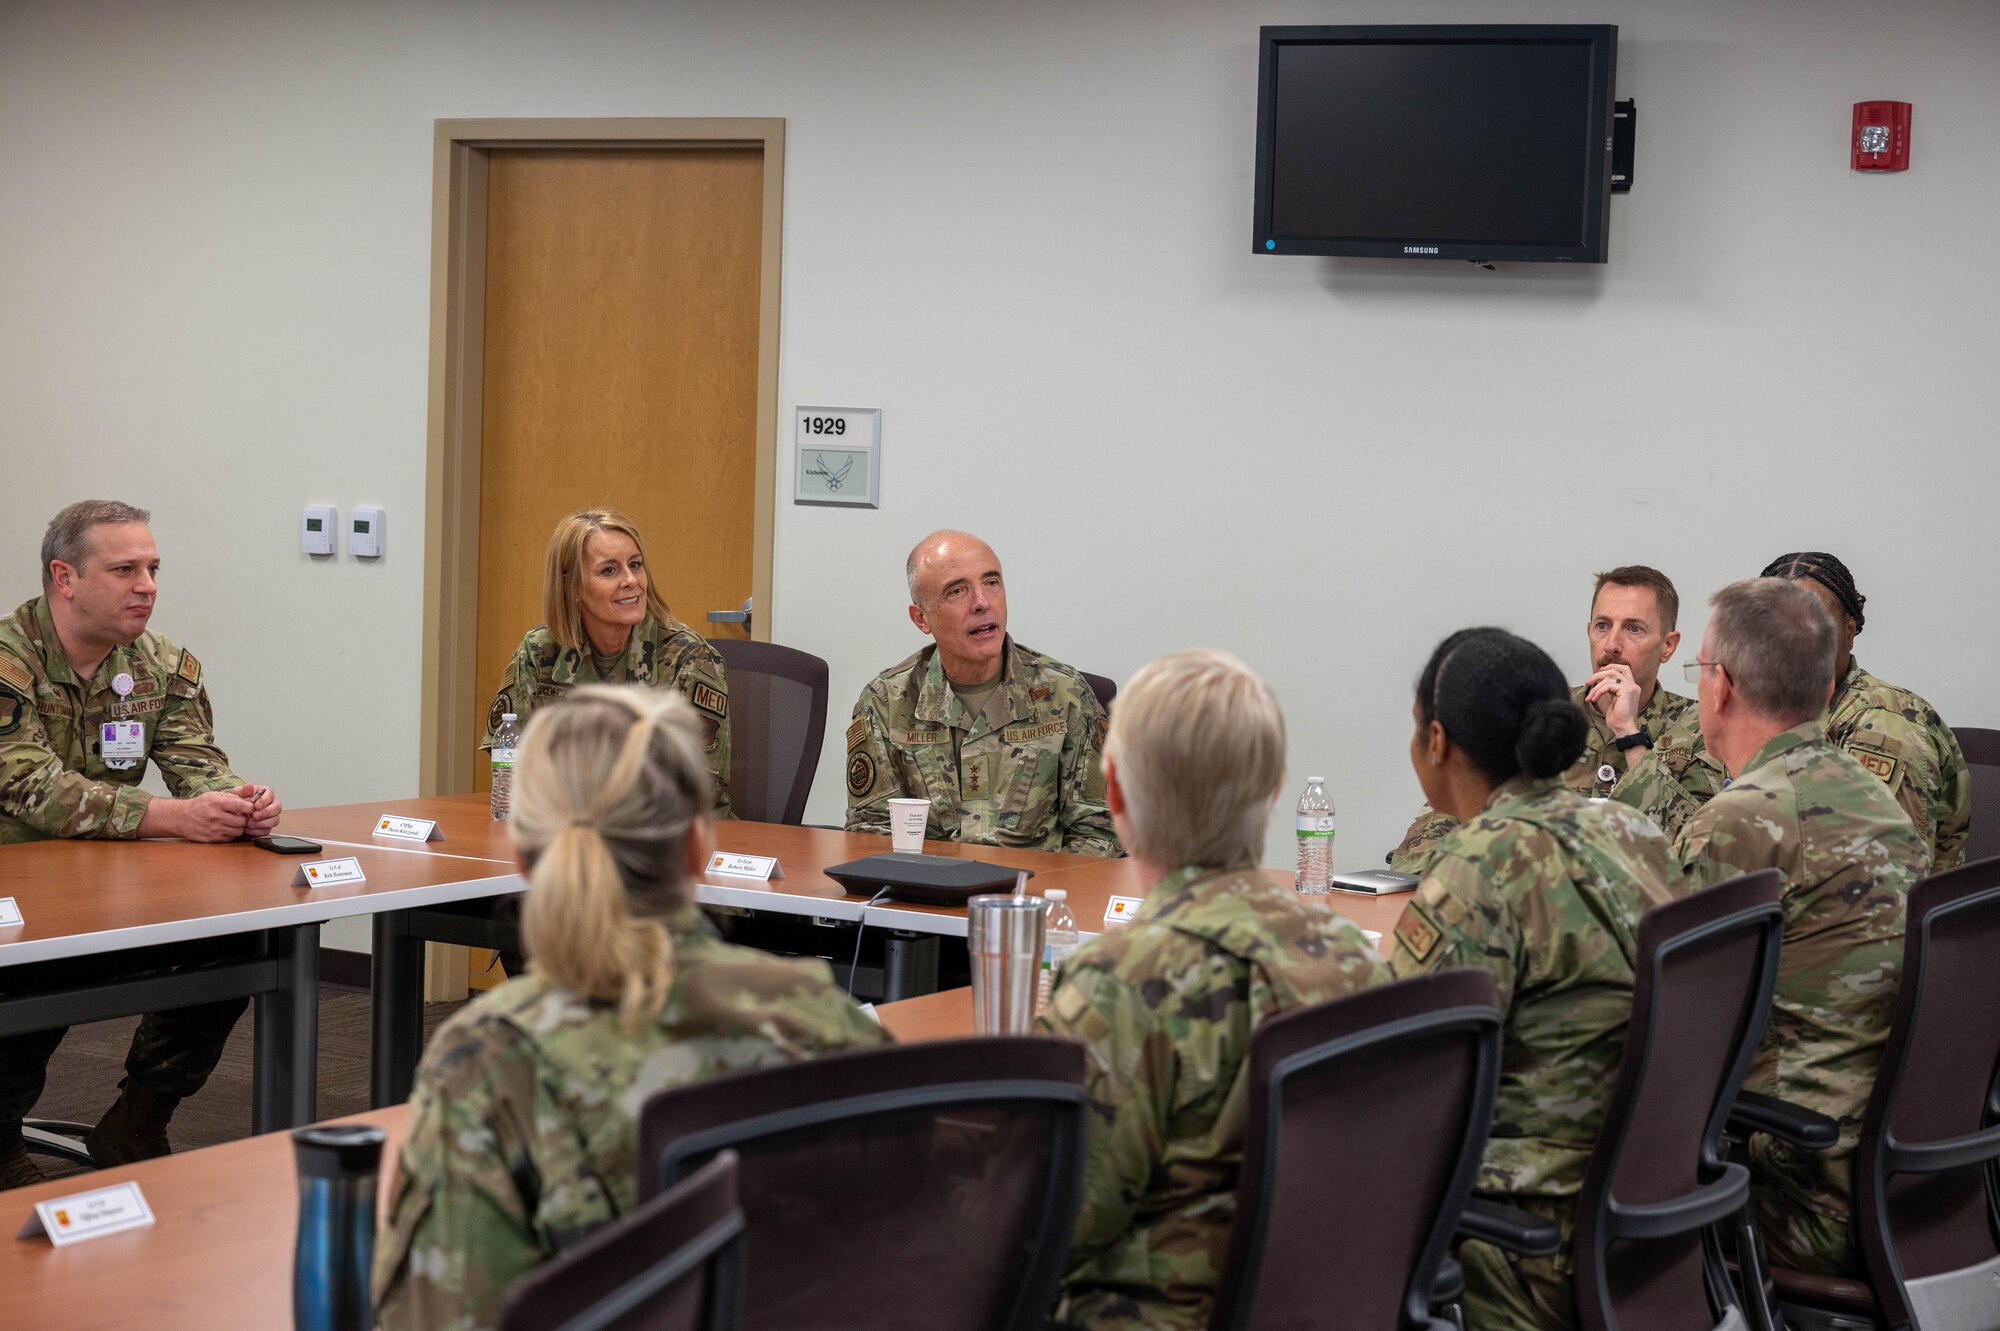 U.S. Air Force Lt. Gen. Robert Miller, Surgeon General of the Air Force, and Chief Master Sgt. Dawn Kolczynski, Medical Enlisted Force Chief, speaks with 56th Medical Group leadership during a mission brief, March 28, 2023, at Luke Air Force Base, Arizona.